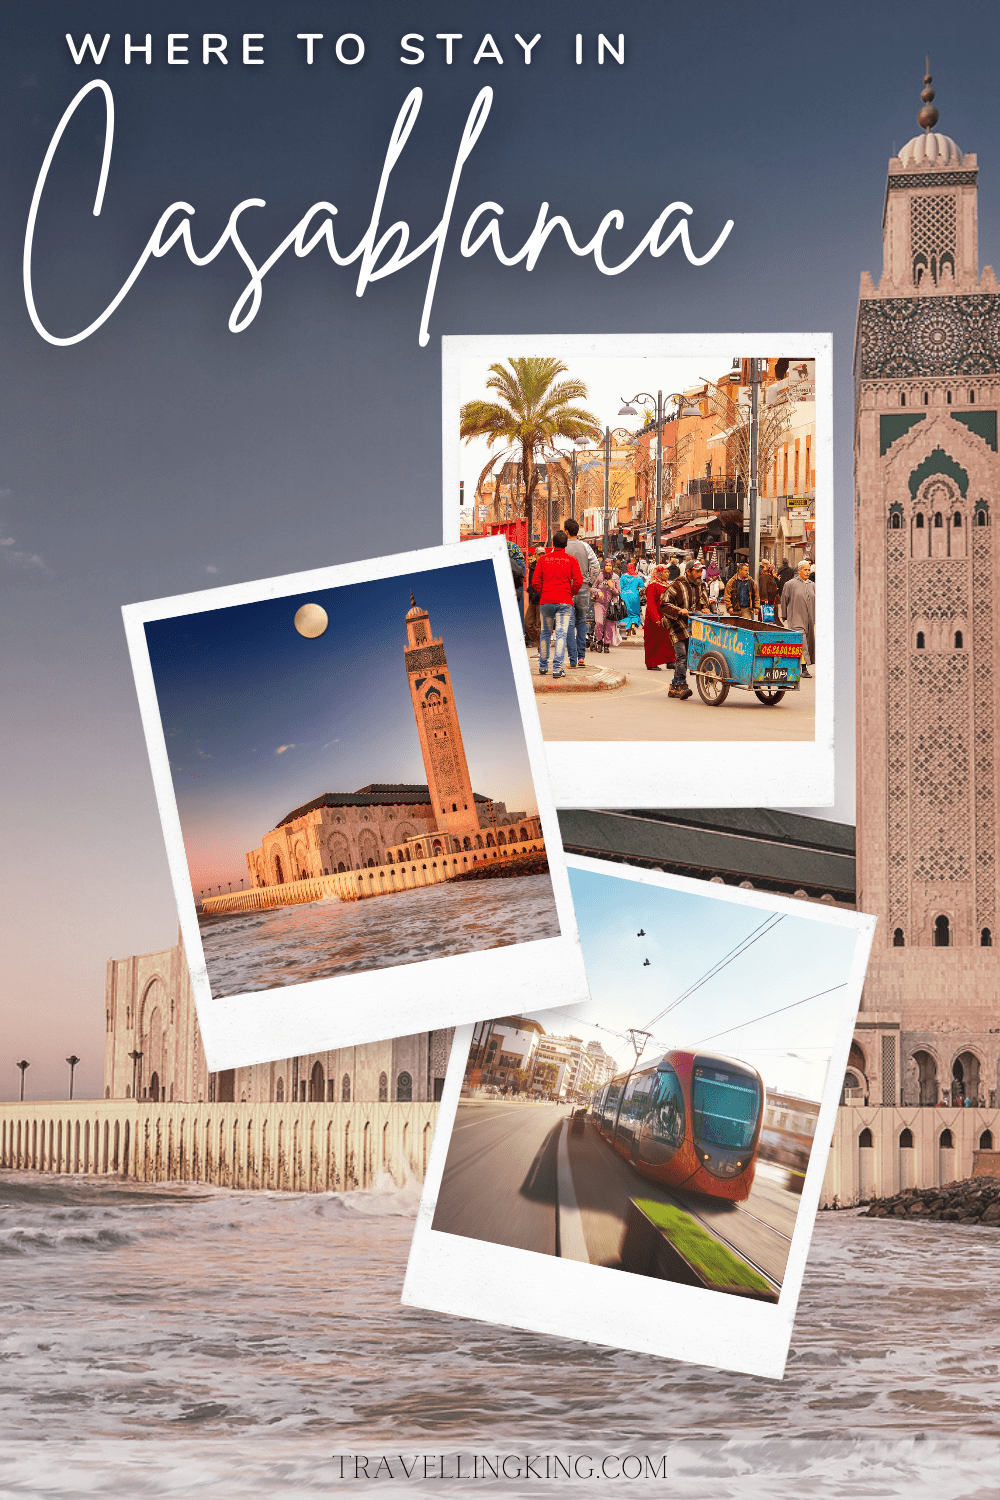 Where to stay in Casablanca